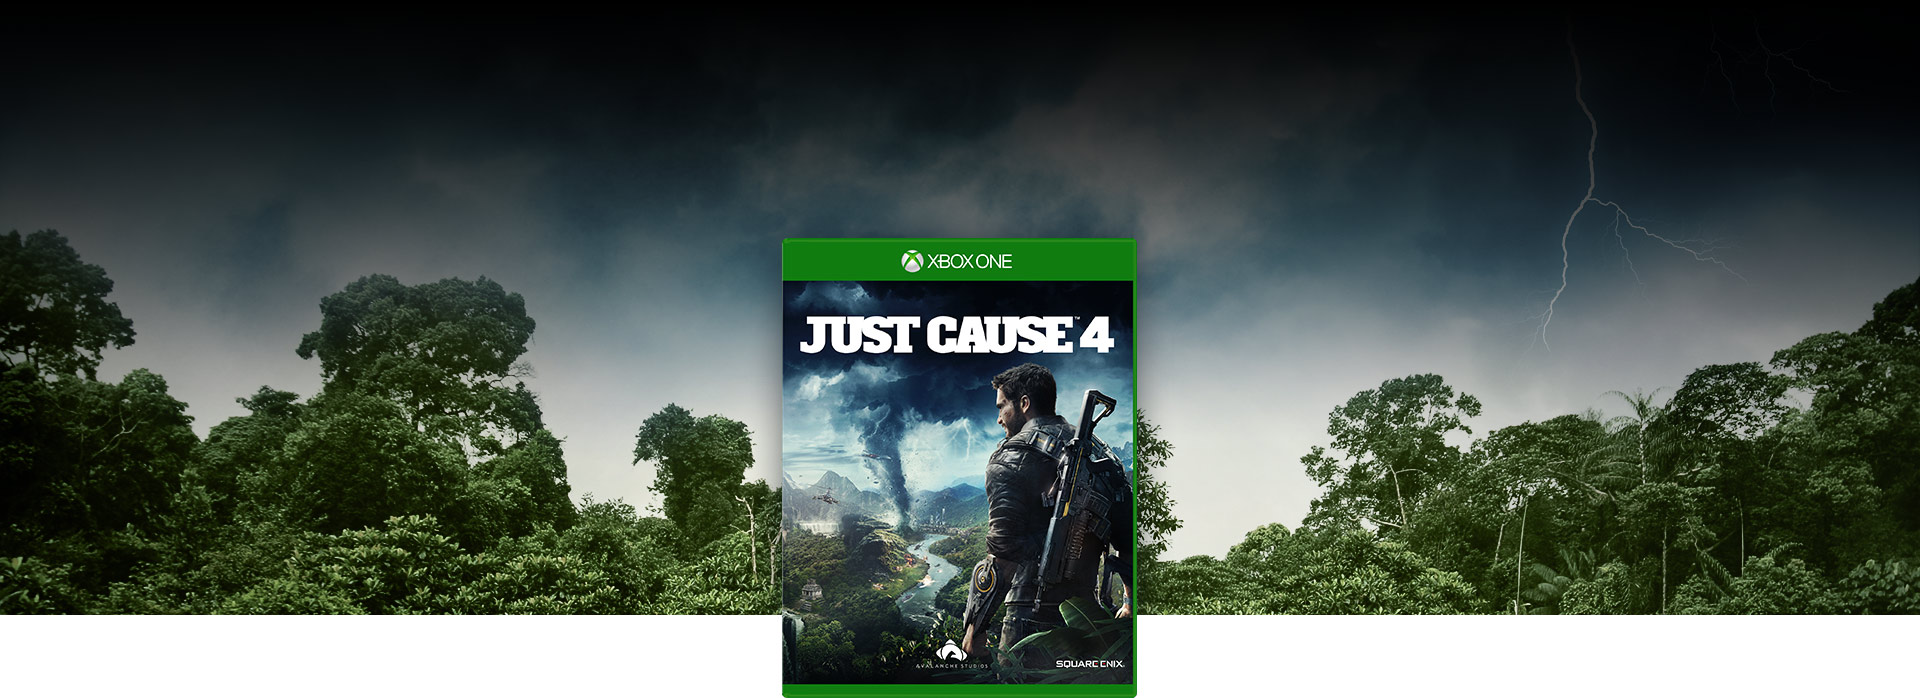 Just Cause 4 box shot, Background of a forest with lightning and dark clouds above